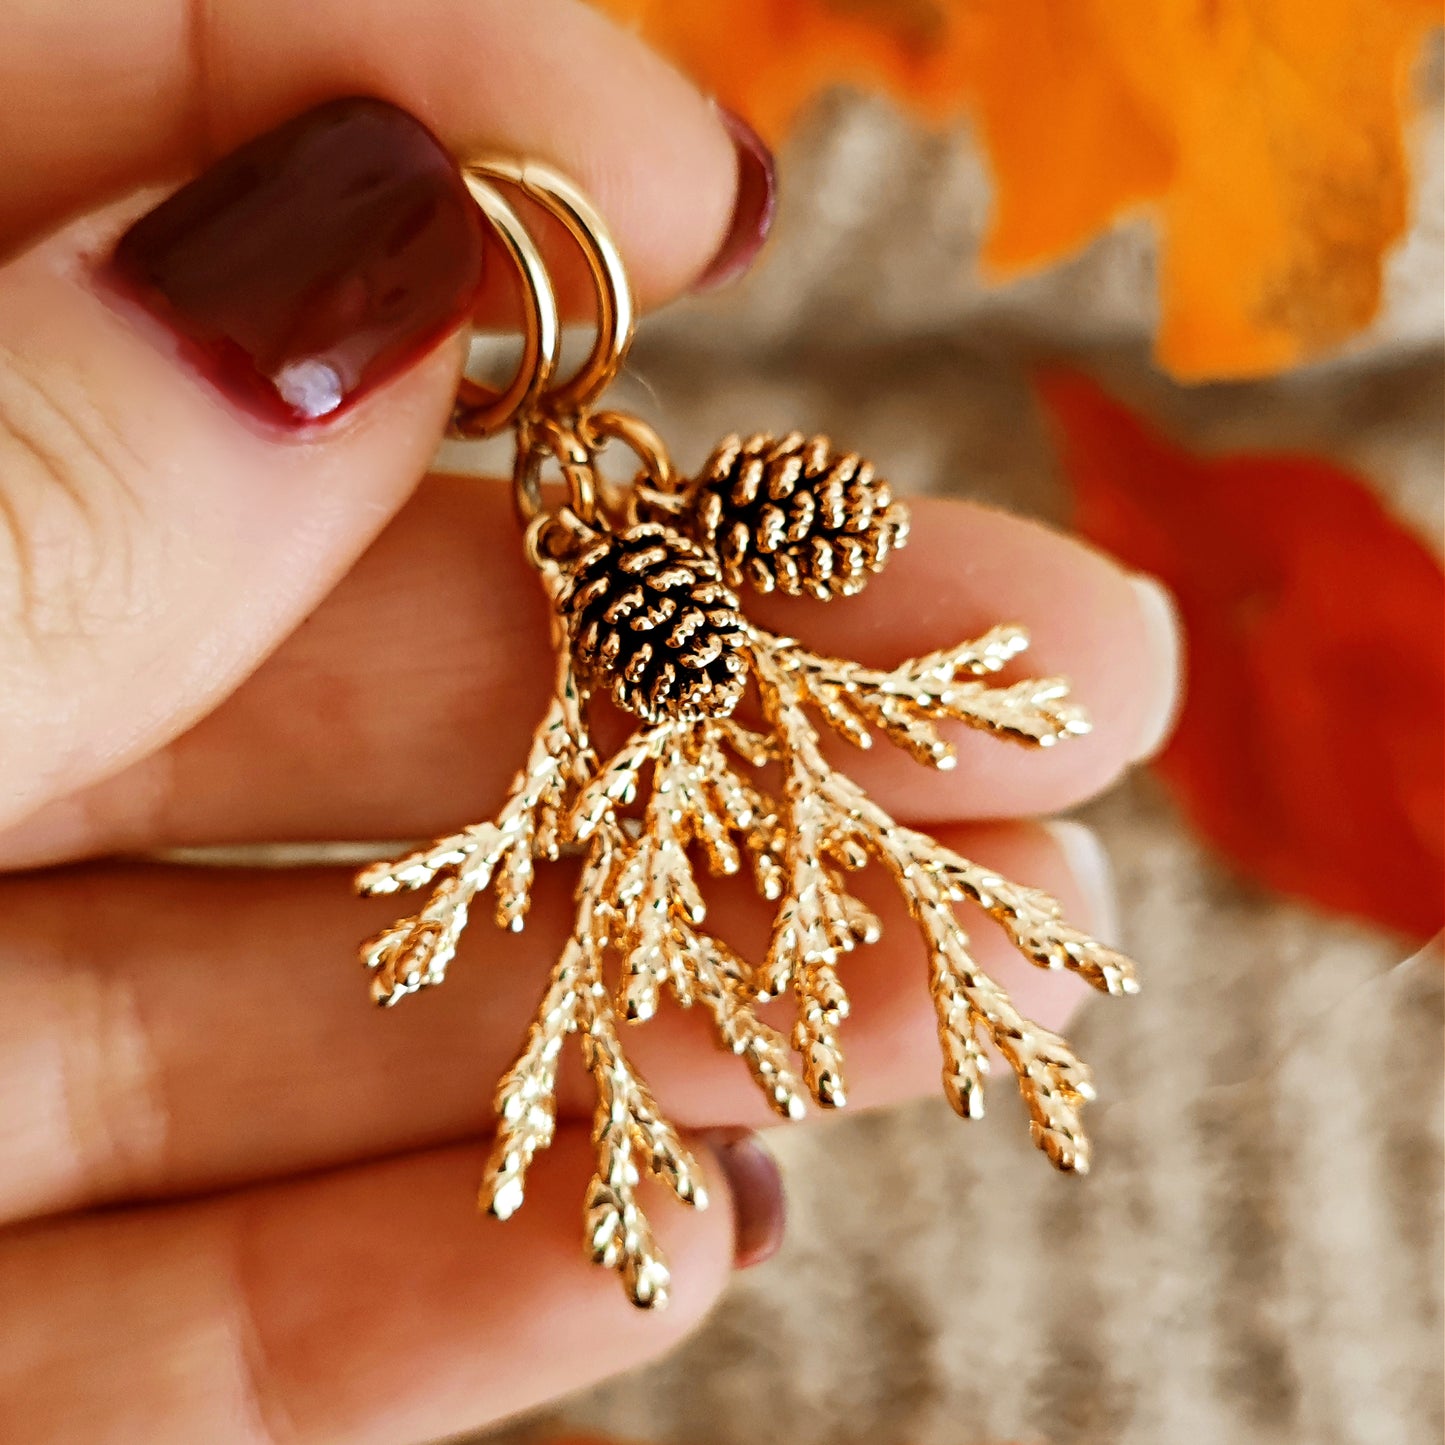 "Pine Forest" earrings with pine tree branches and pine cones